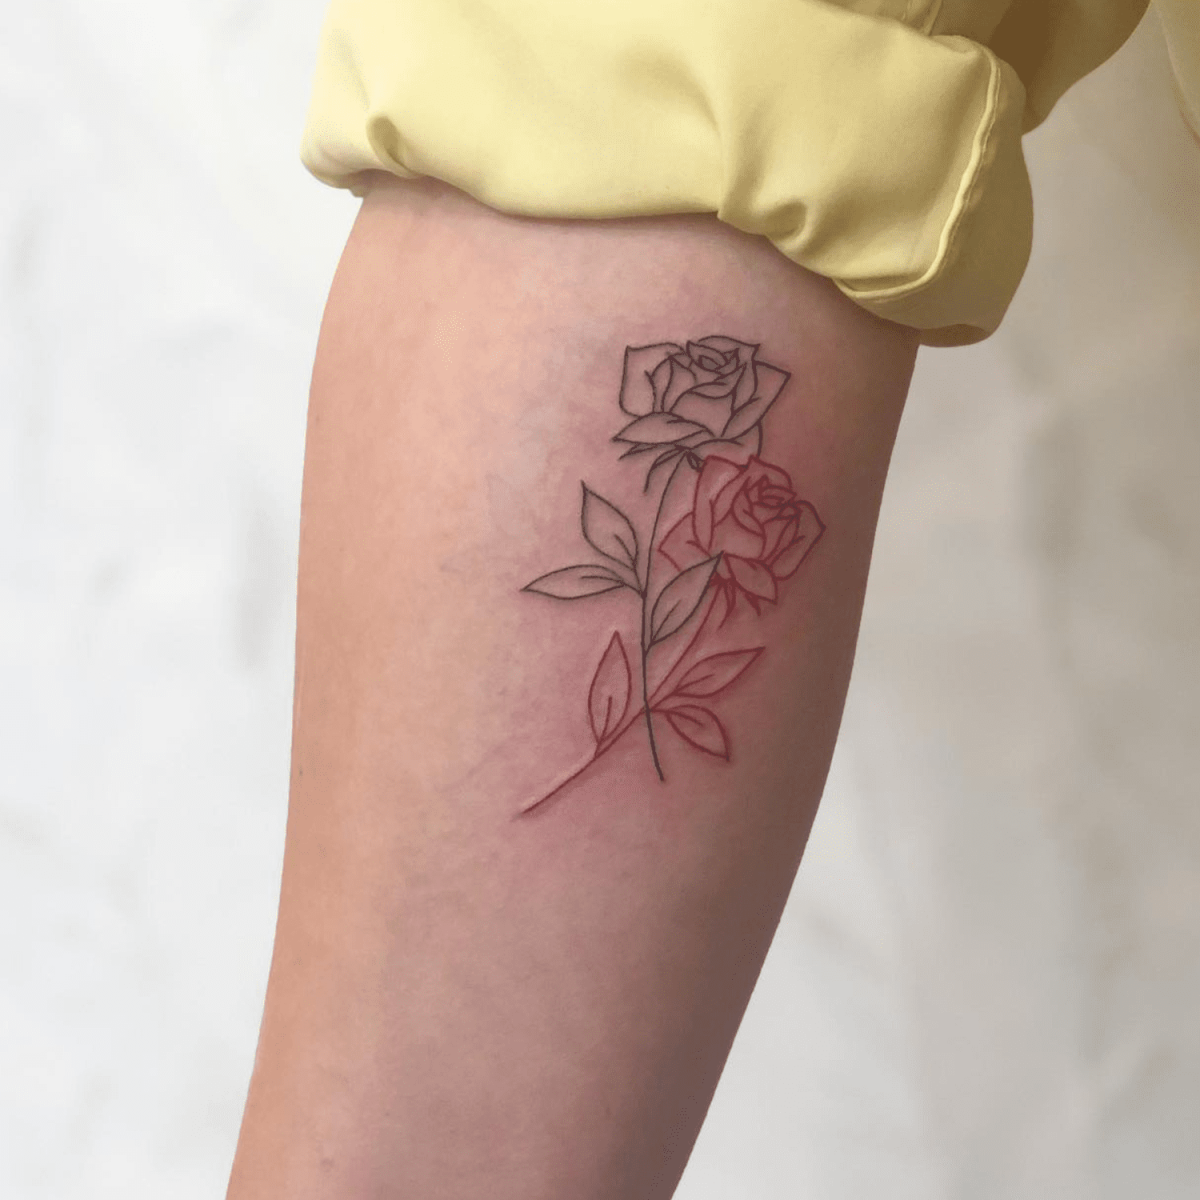 Rose Tattoo Ideas to Inspire Your Next Ink